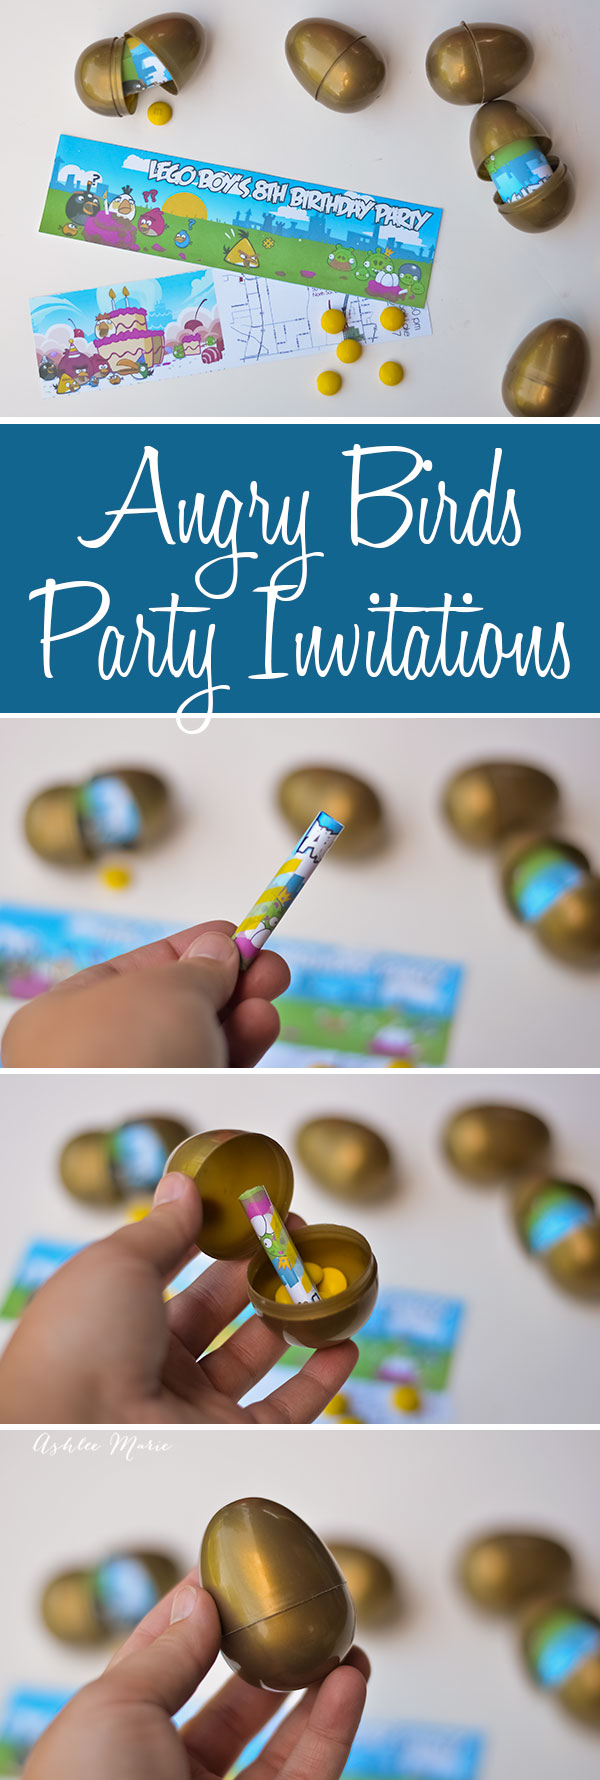 unique invitations for your angry birds party, rather than simple invitations use plastic golden eggs to package and deliver the invitation